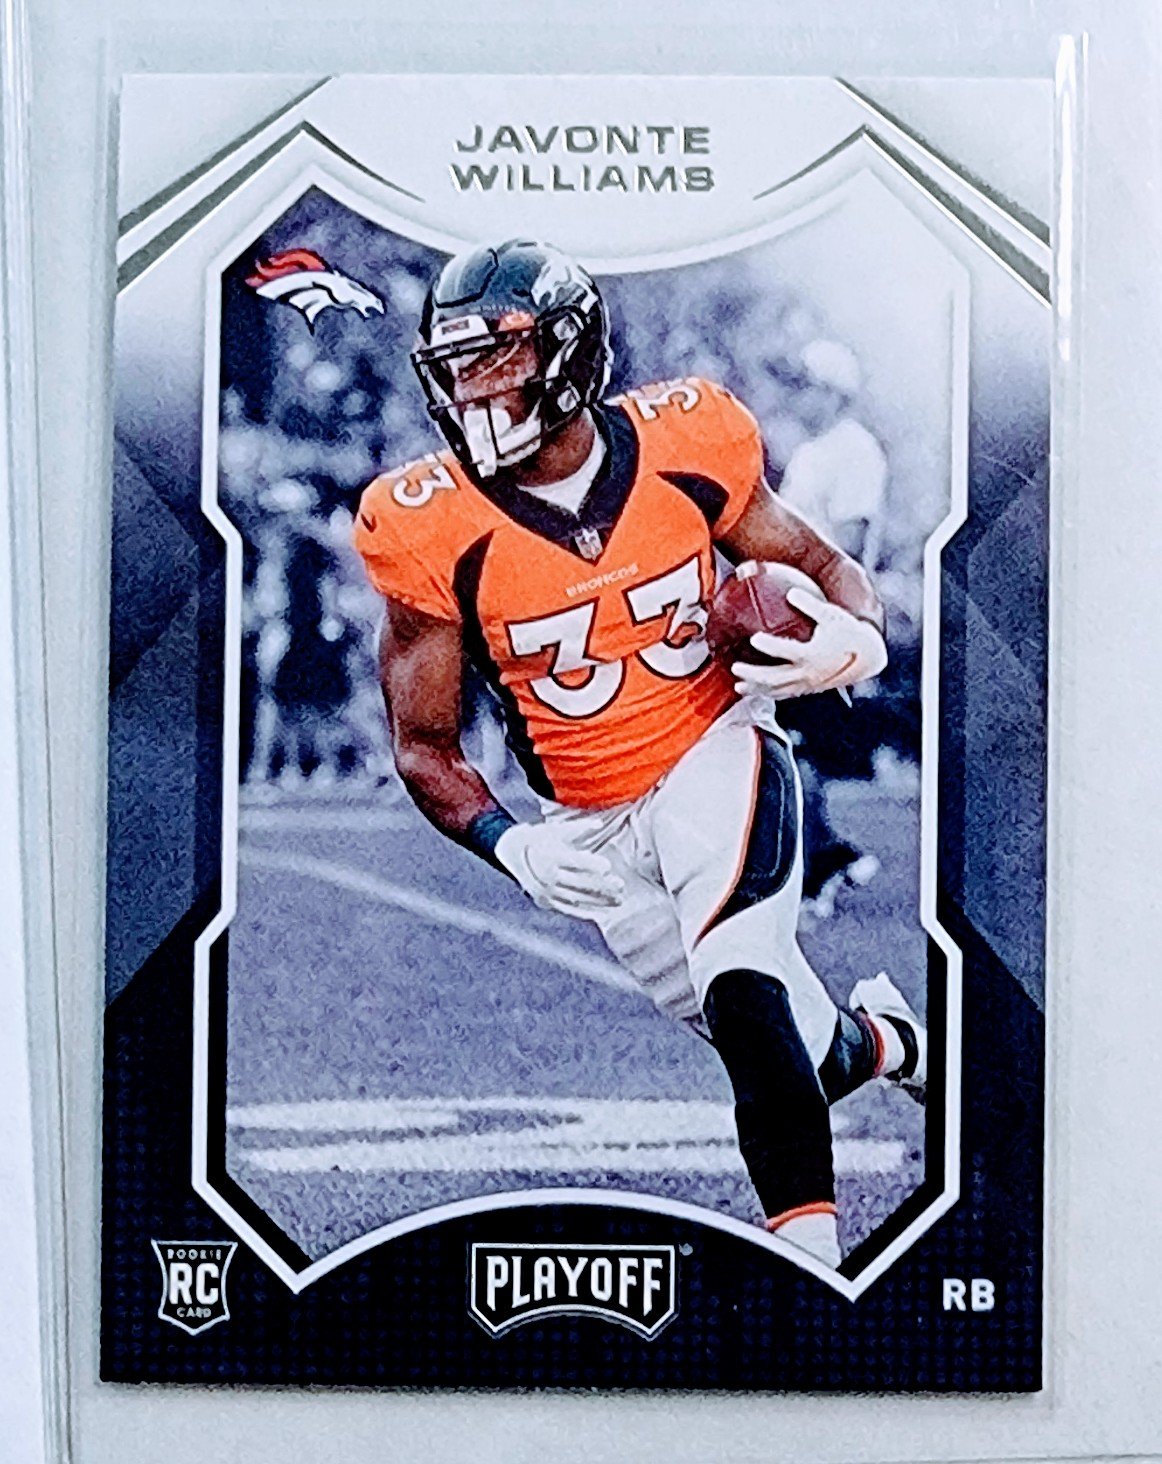 2021 Panini Playoffs Javonte Williams Rookie Football Card AVM1 simple Xclusive Collectibles   